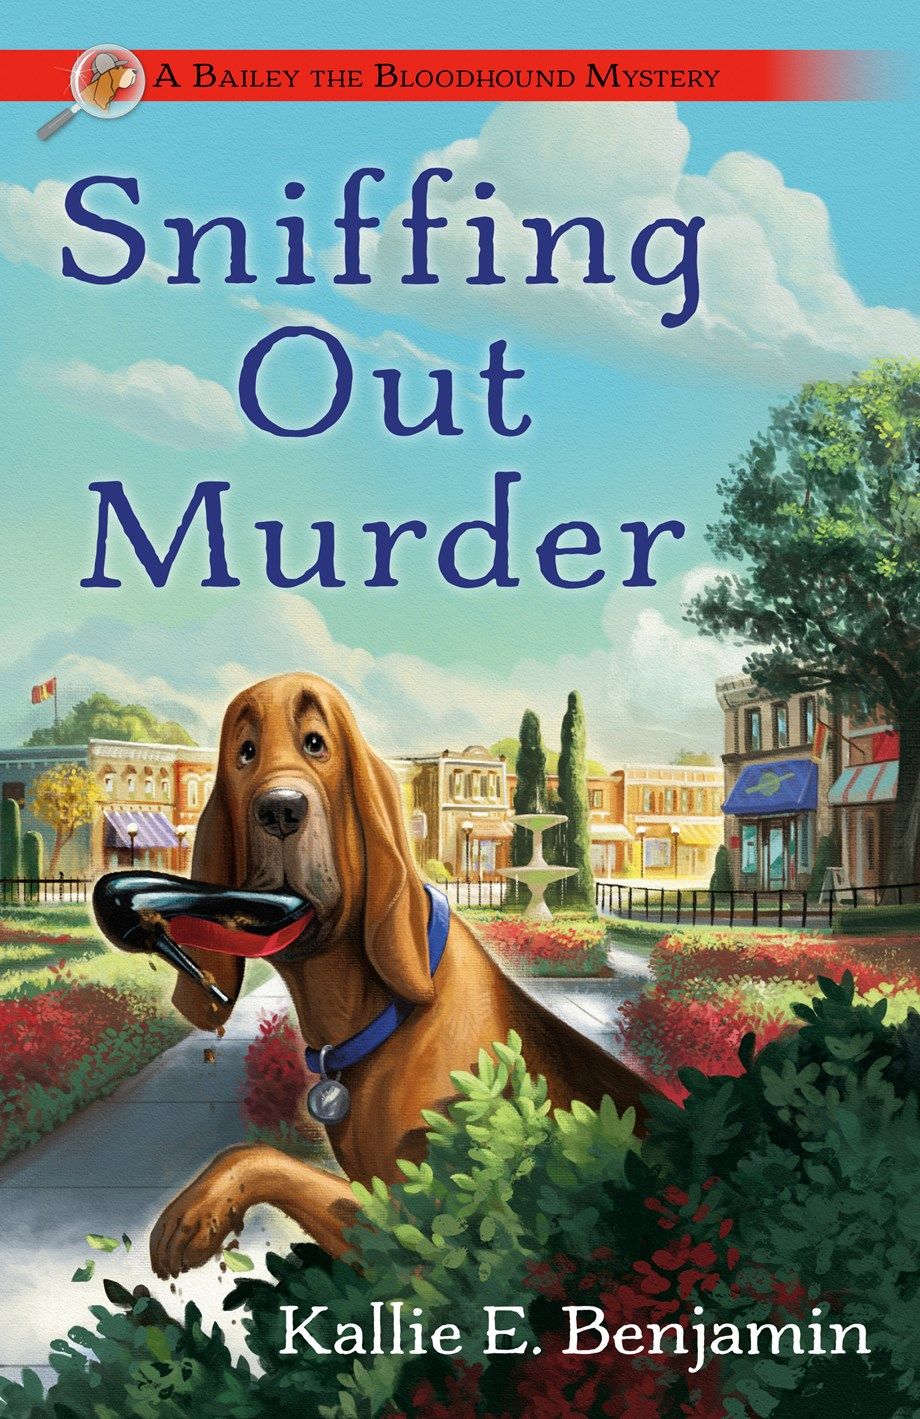 Coming soon! Cozy Mystery new releases for January 2023 * book frolic